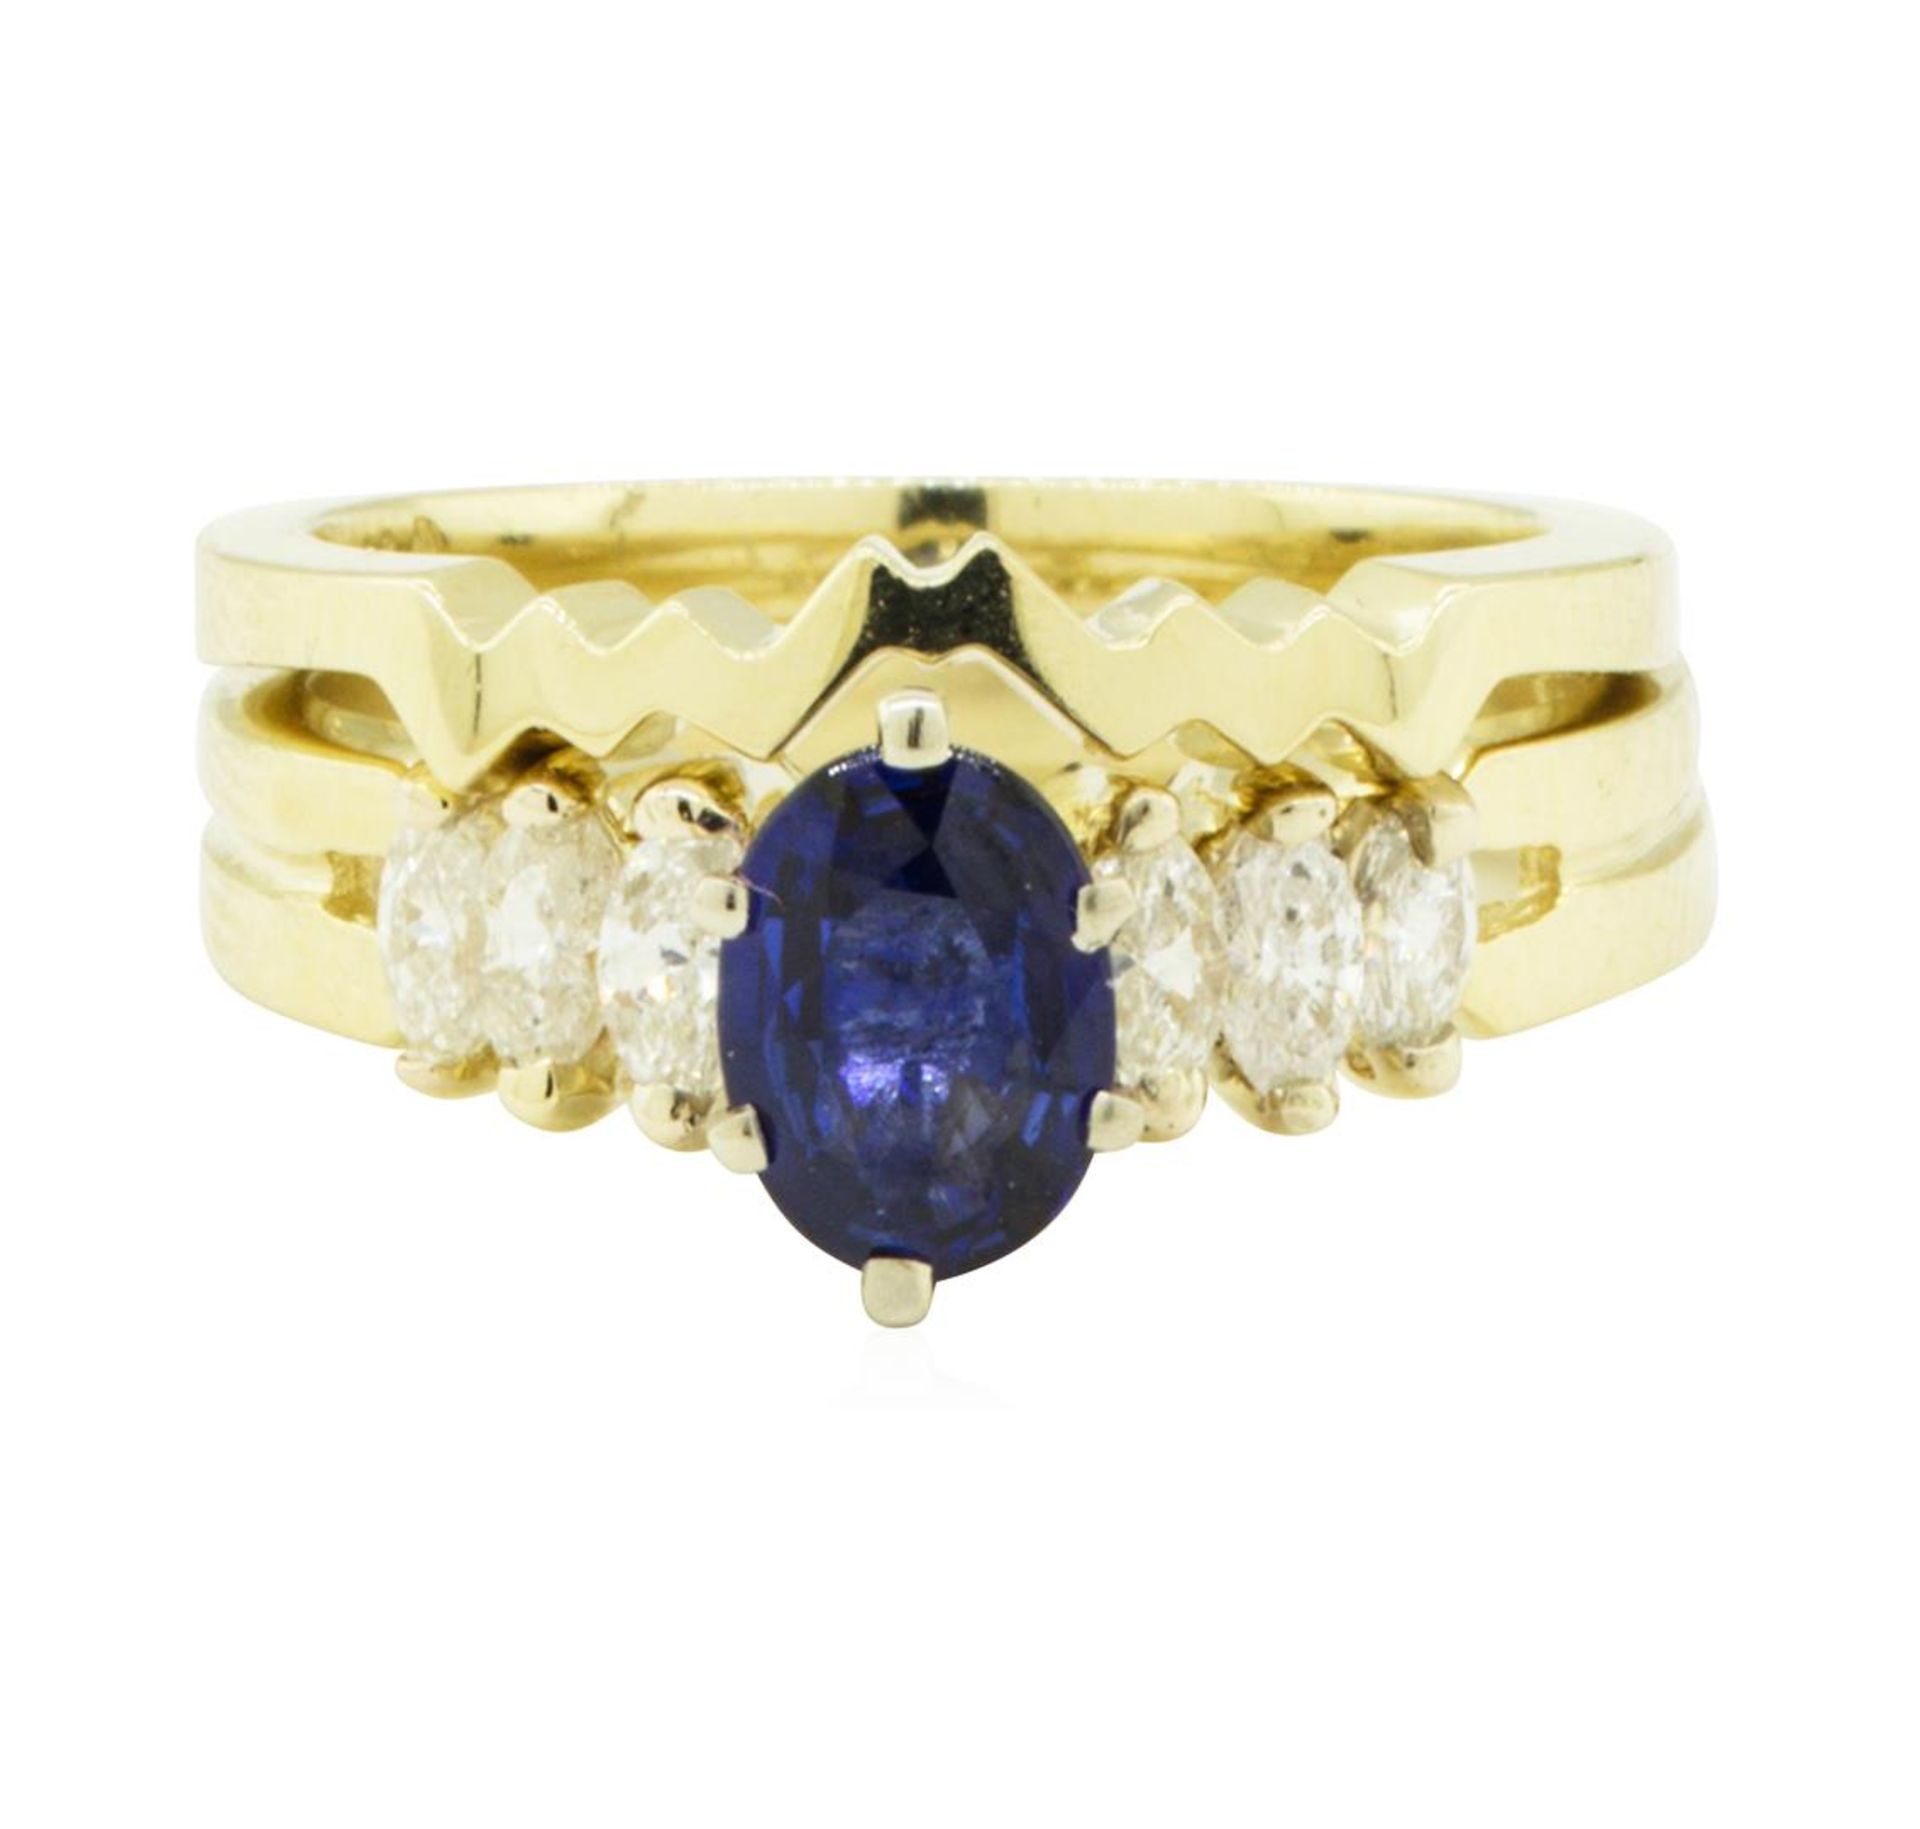 1.25ctw Blue Sapphire and Diamond Ring Set - 14KT Yellow Gold - Image 2 of 4